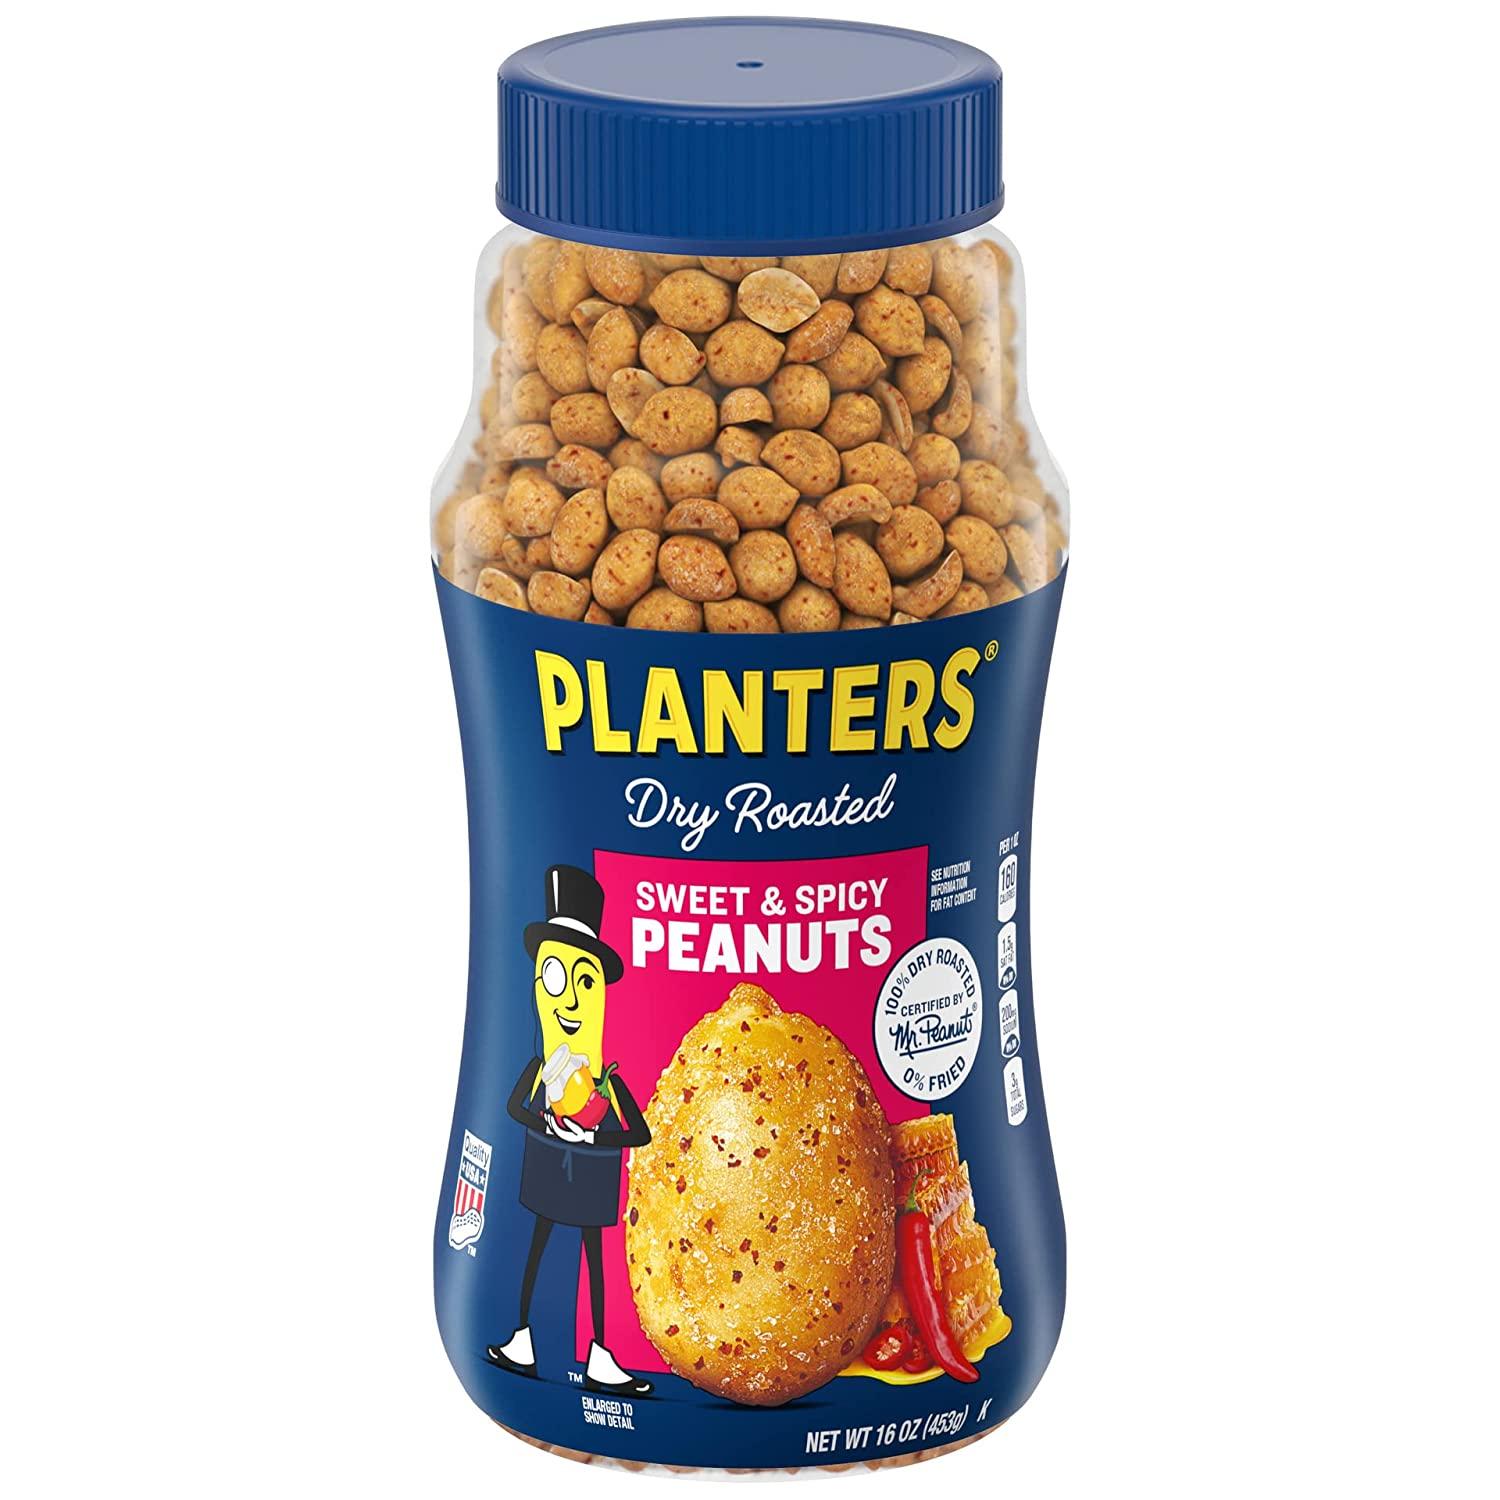 Planters Sweet and Spicy Dry Roasted Peanuts for $2.84 Shipped